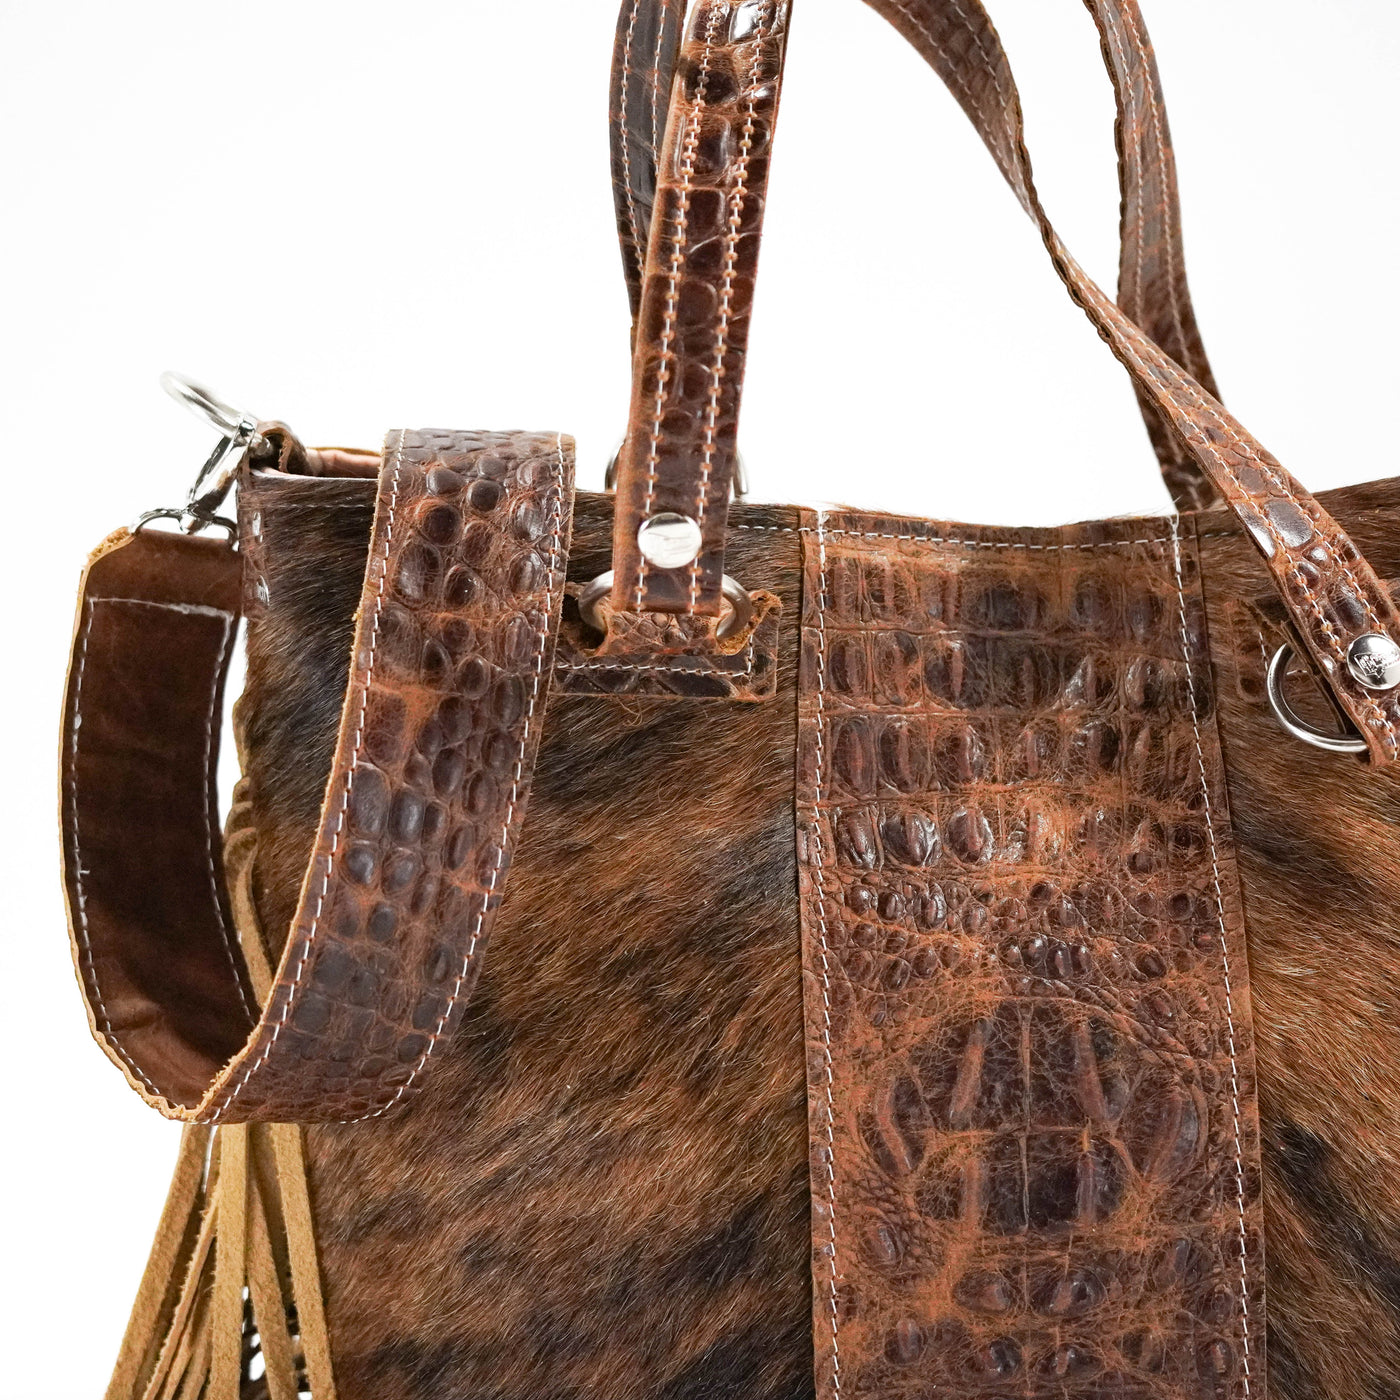 Taylor - Brindle w/ Saddle Croc-Taylor-Western-Cowhide-Bags-Handmade-Products-Gifts-Dancing Cactus Designs